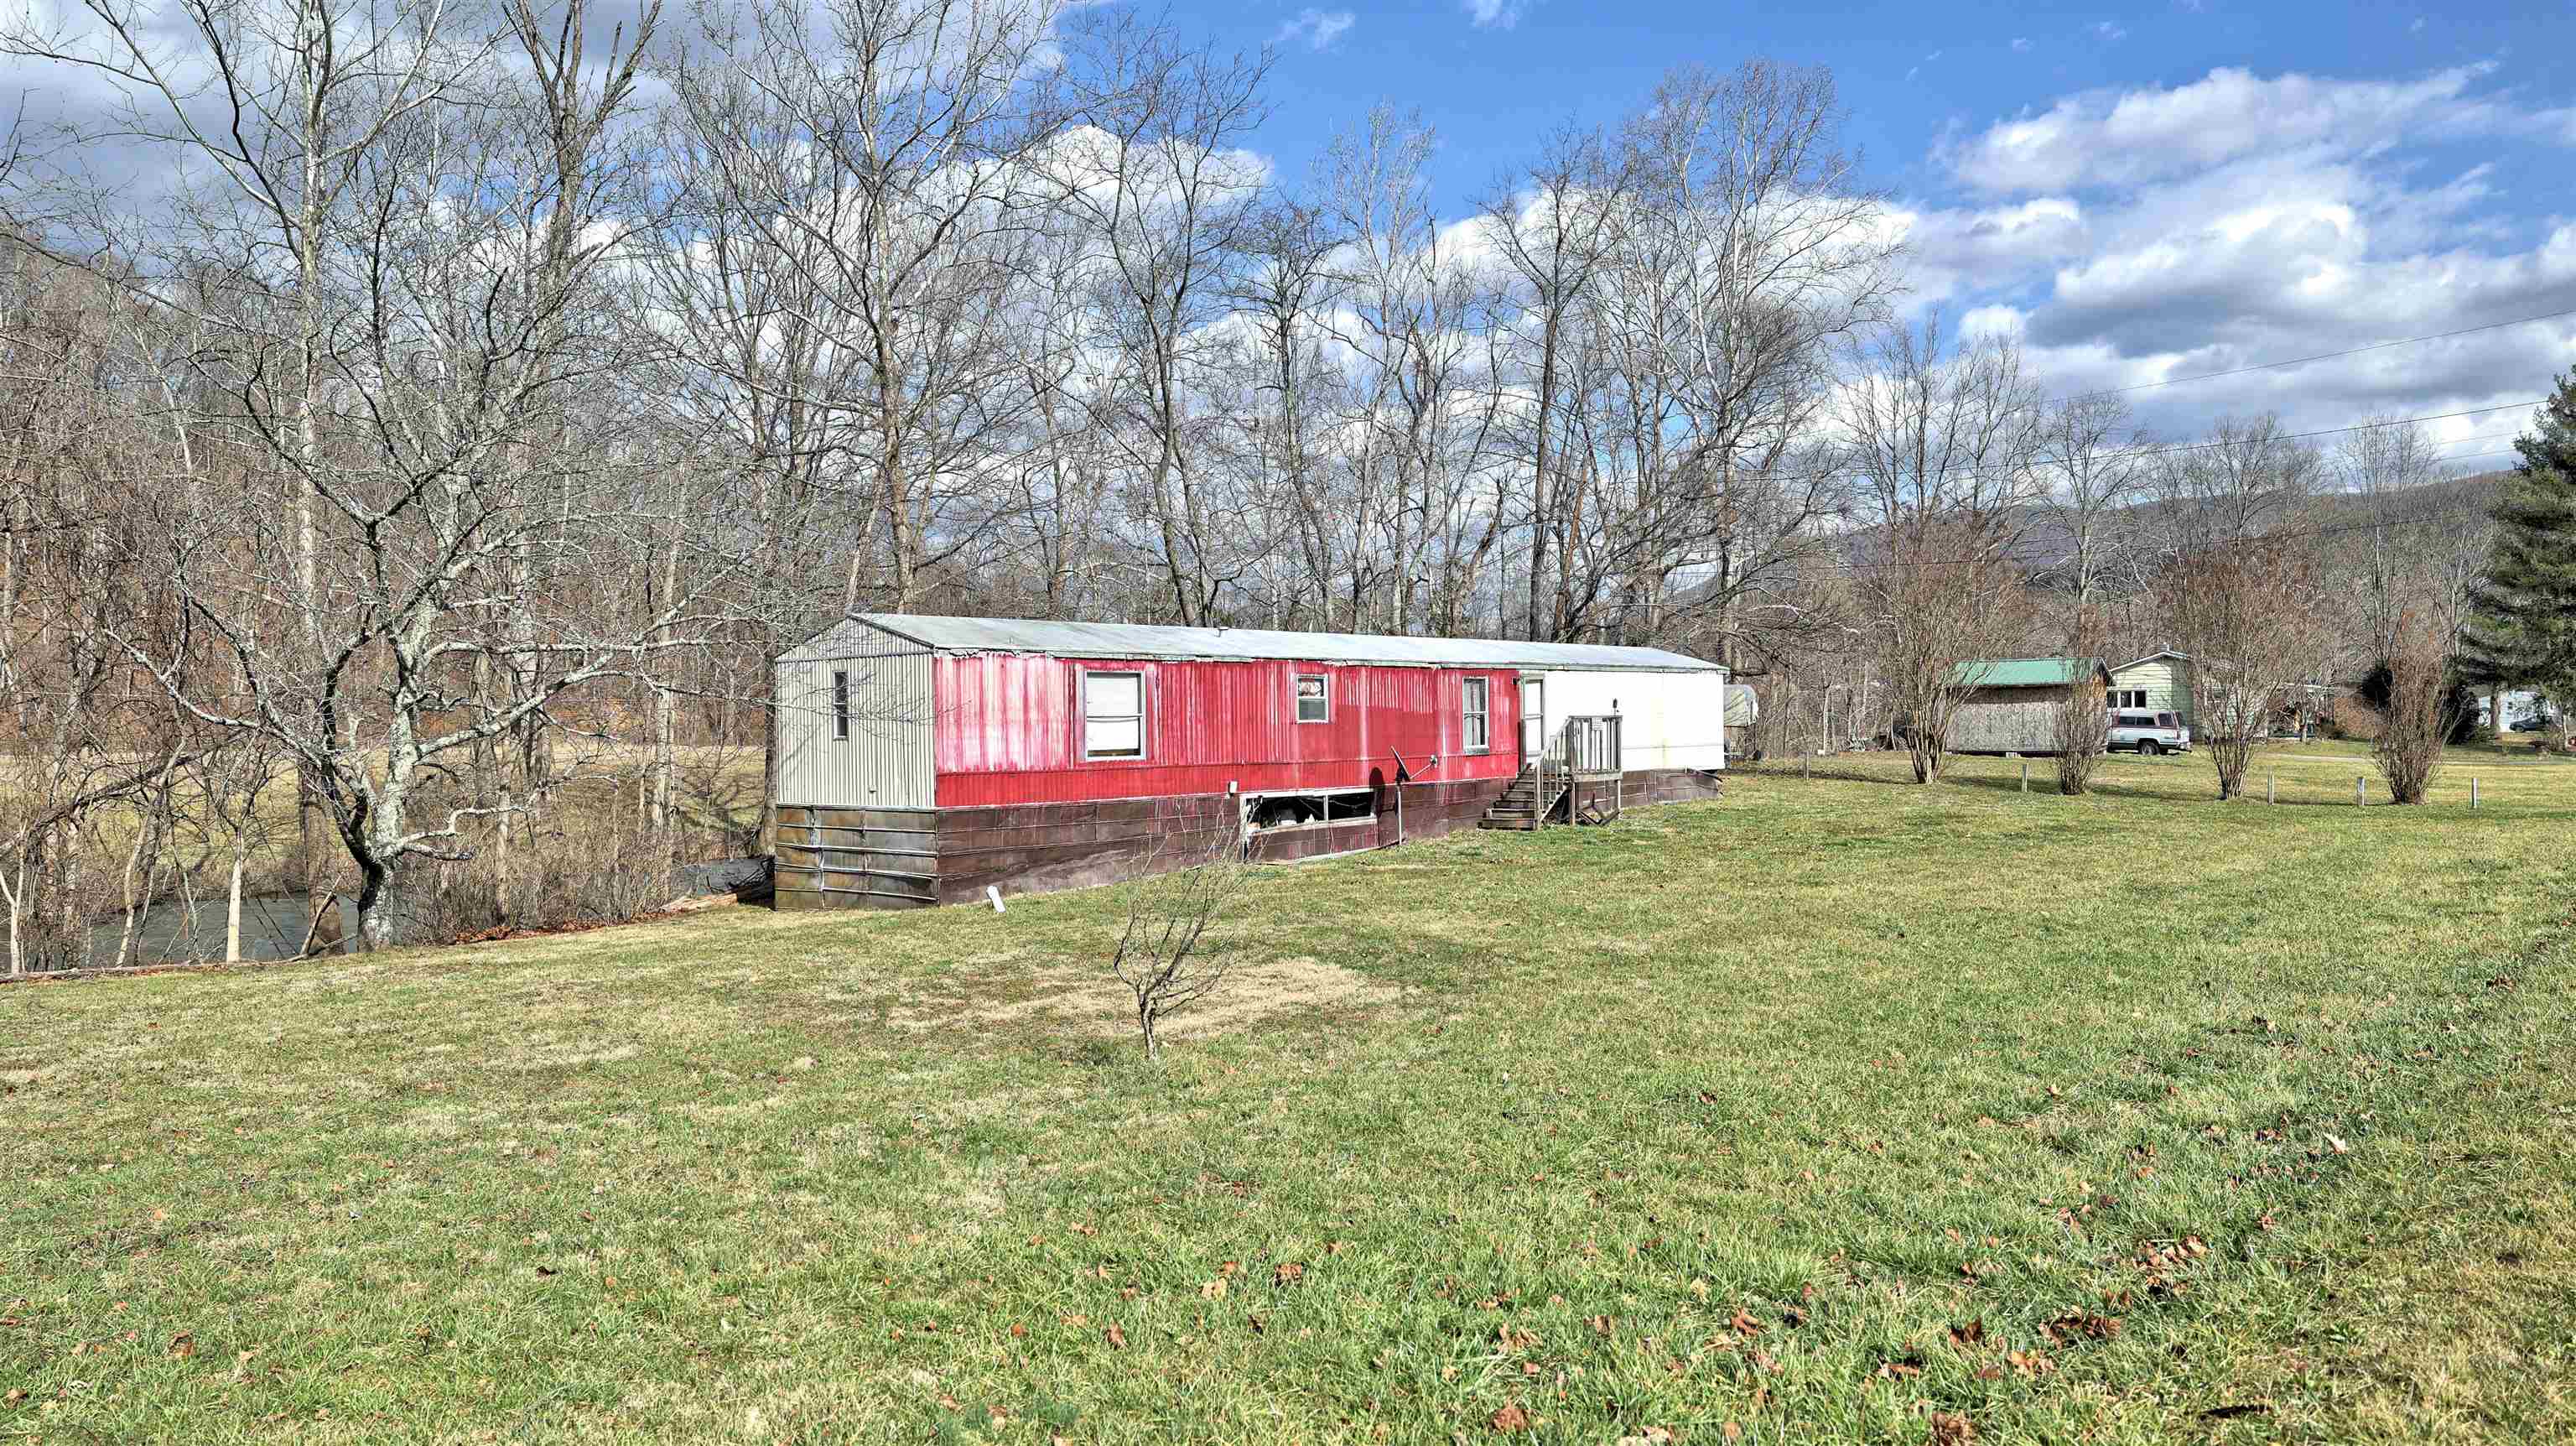 This handy man special has a three bedroom, two full bath, 1990 mobile home on a flat .3 acre lot just 3 miles from downtown Narrows and minutes to Rt. 460.  The home sits above the 100 yr mark flood plain and near the State Trout Stocked Stream Wolf Creek with lots of great fishing!  Great weekend vacation property, investment property or full time residence with sweat equity!  Additional adjoining property with creek frontage available.